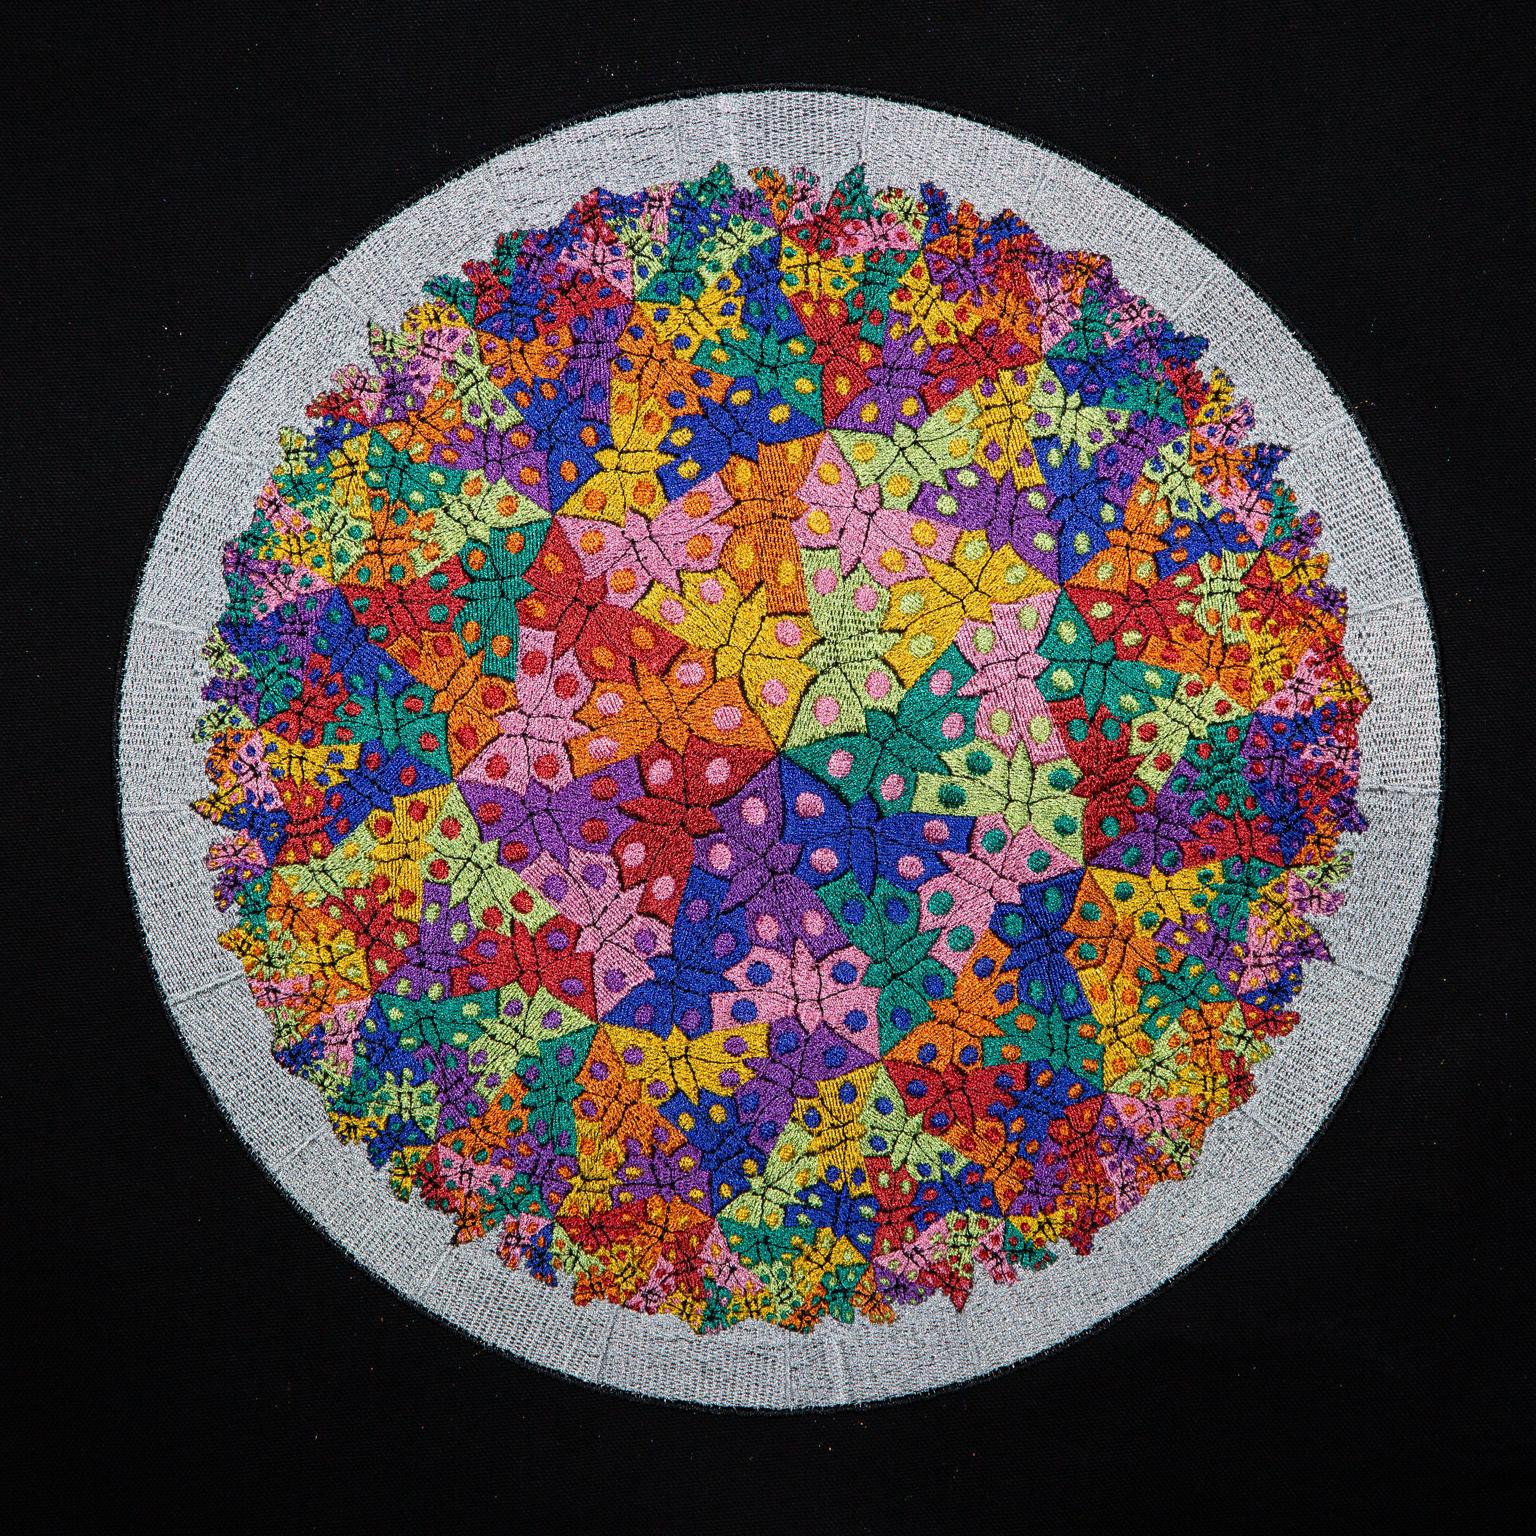 Image for entry 'An Embroidered (3,7) Hyperbolic Butterfly Pattern'